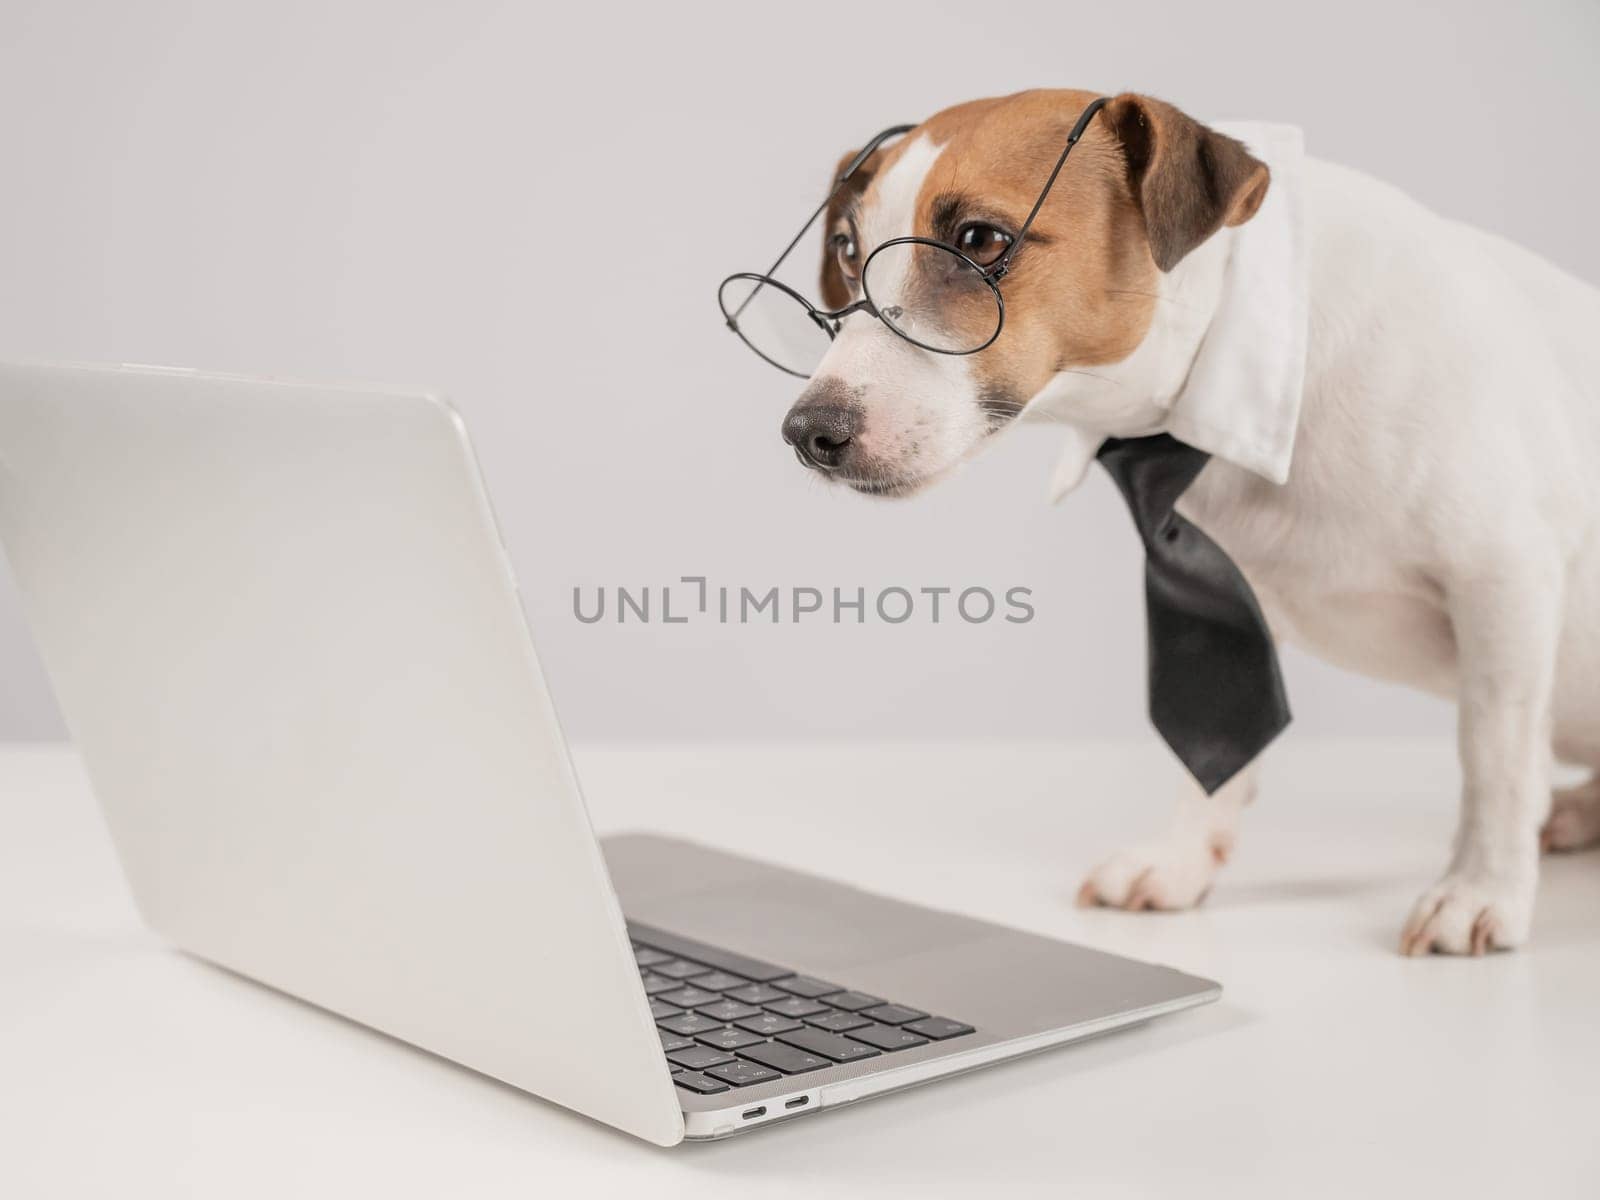 Cute Jack Russell Terrier dog wearing glasses and a tie sits at a laptop on a white background. by mrwed54